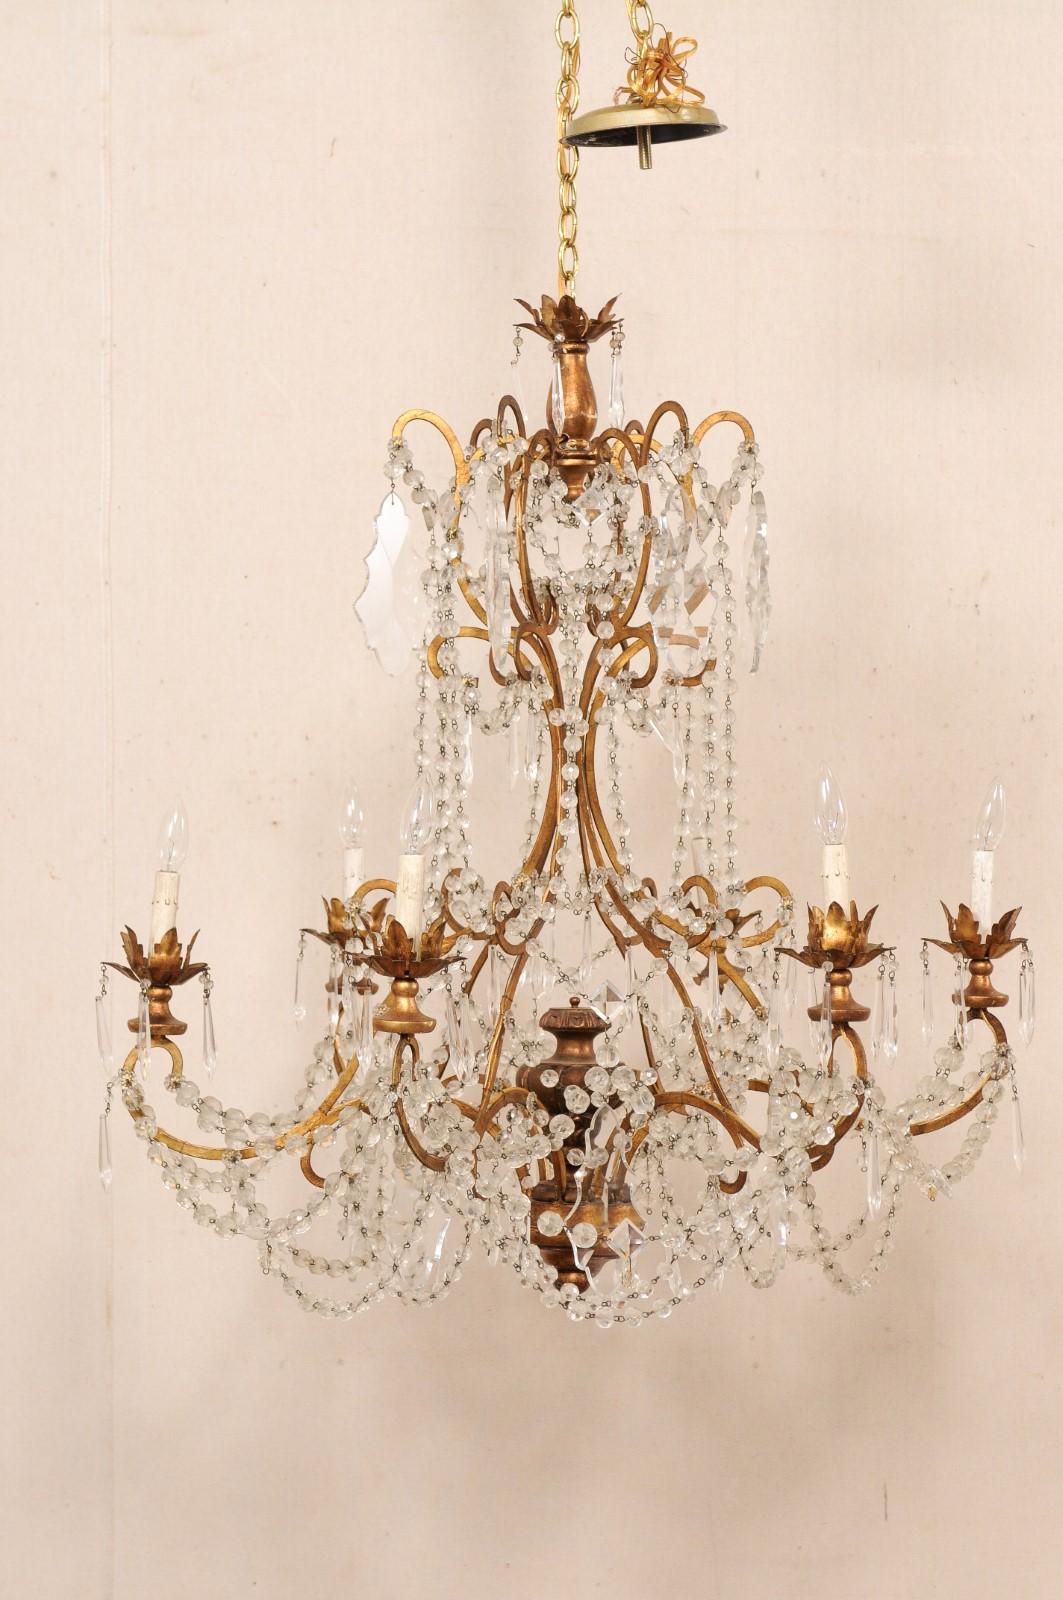 An Italian six-light crystal chandelier from the early to mid 20th century. This antique chandelier from Italy features a scrolling gold-toned armature which is adorn with a crystals and draped in Italian glass bead swags. Six upwardly-scrolling